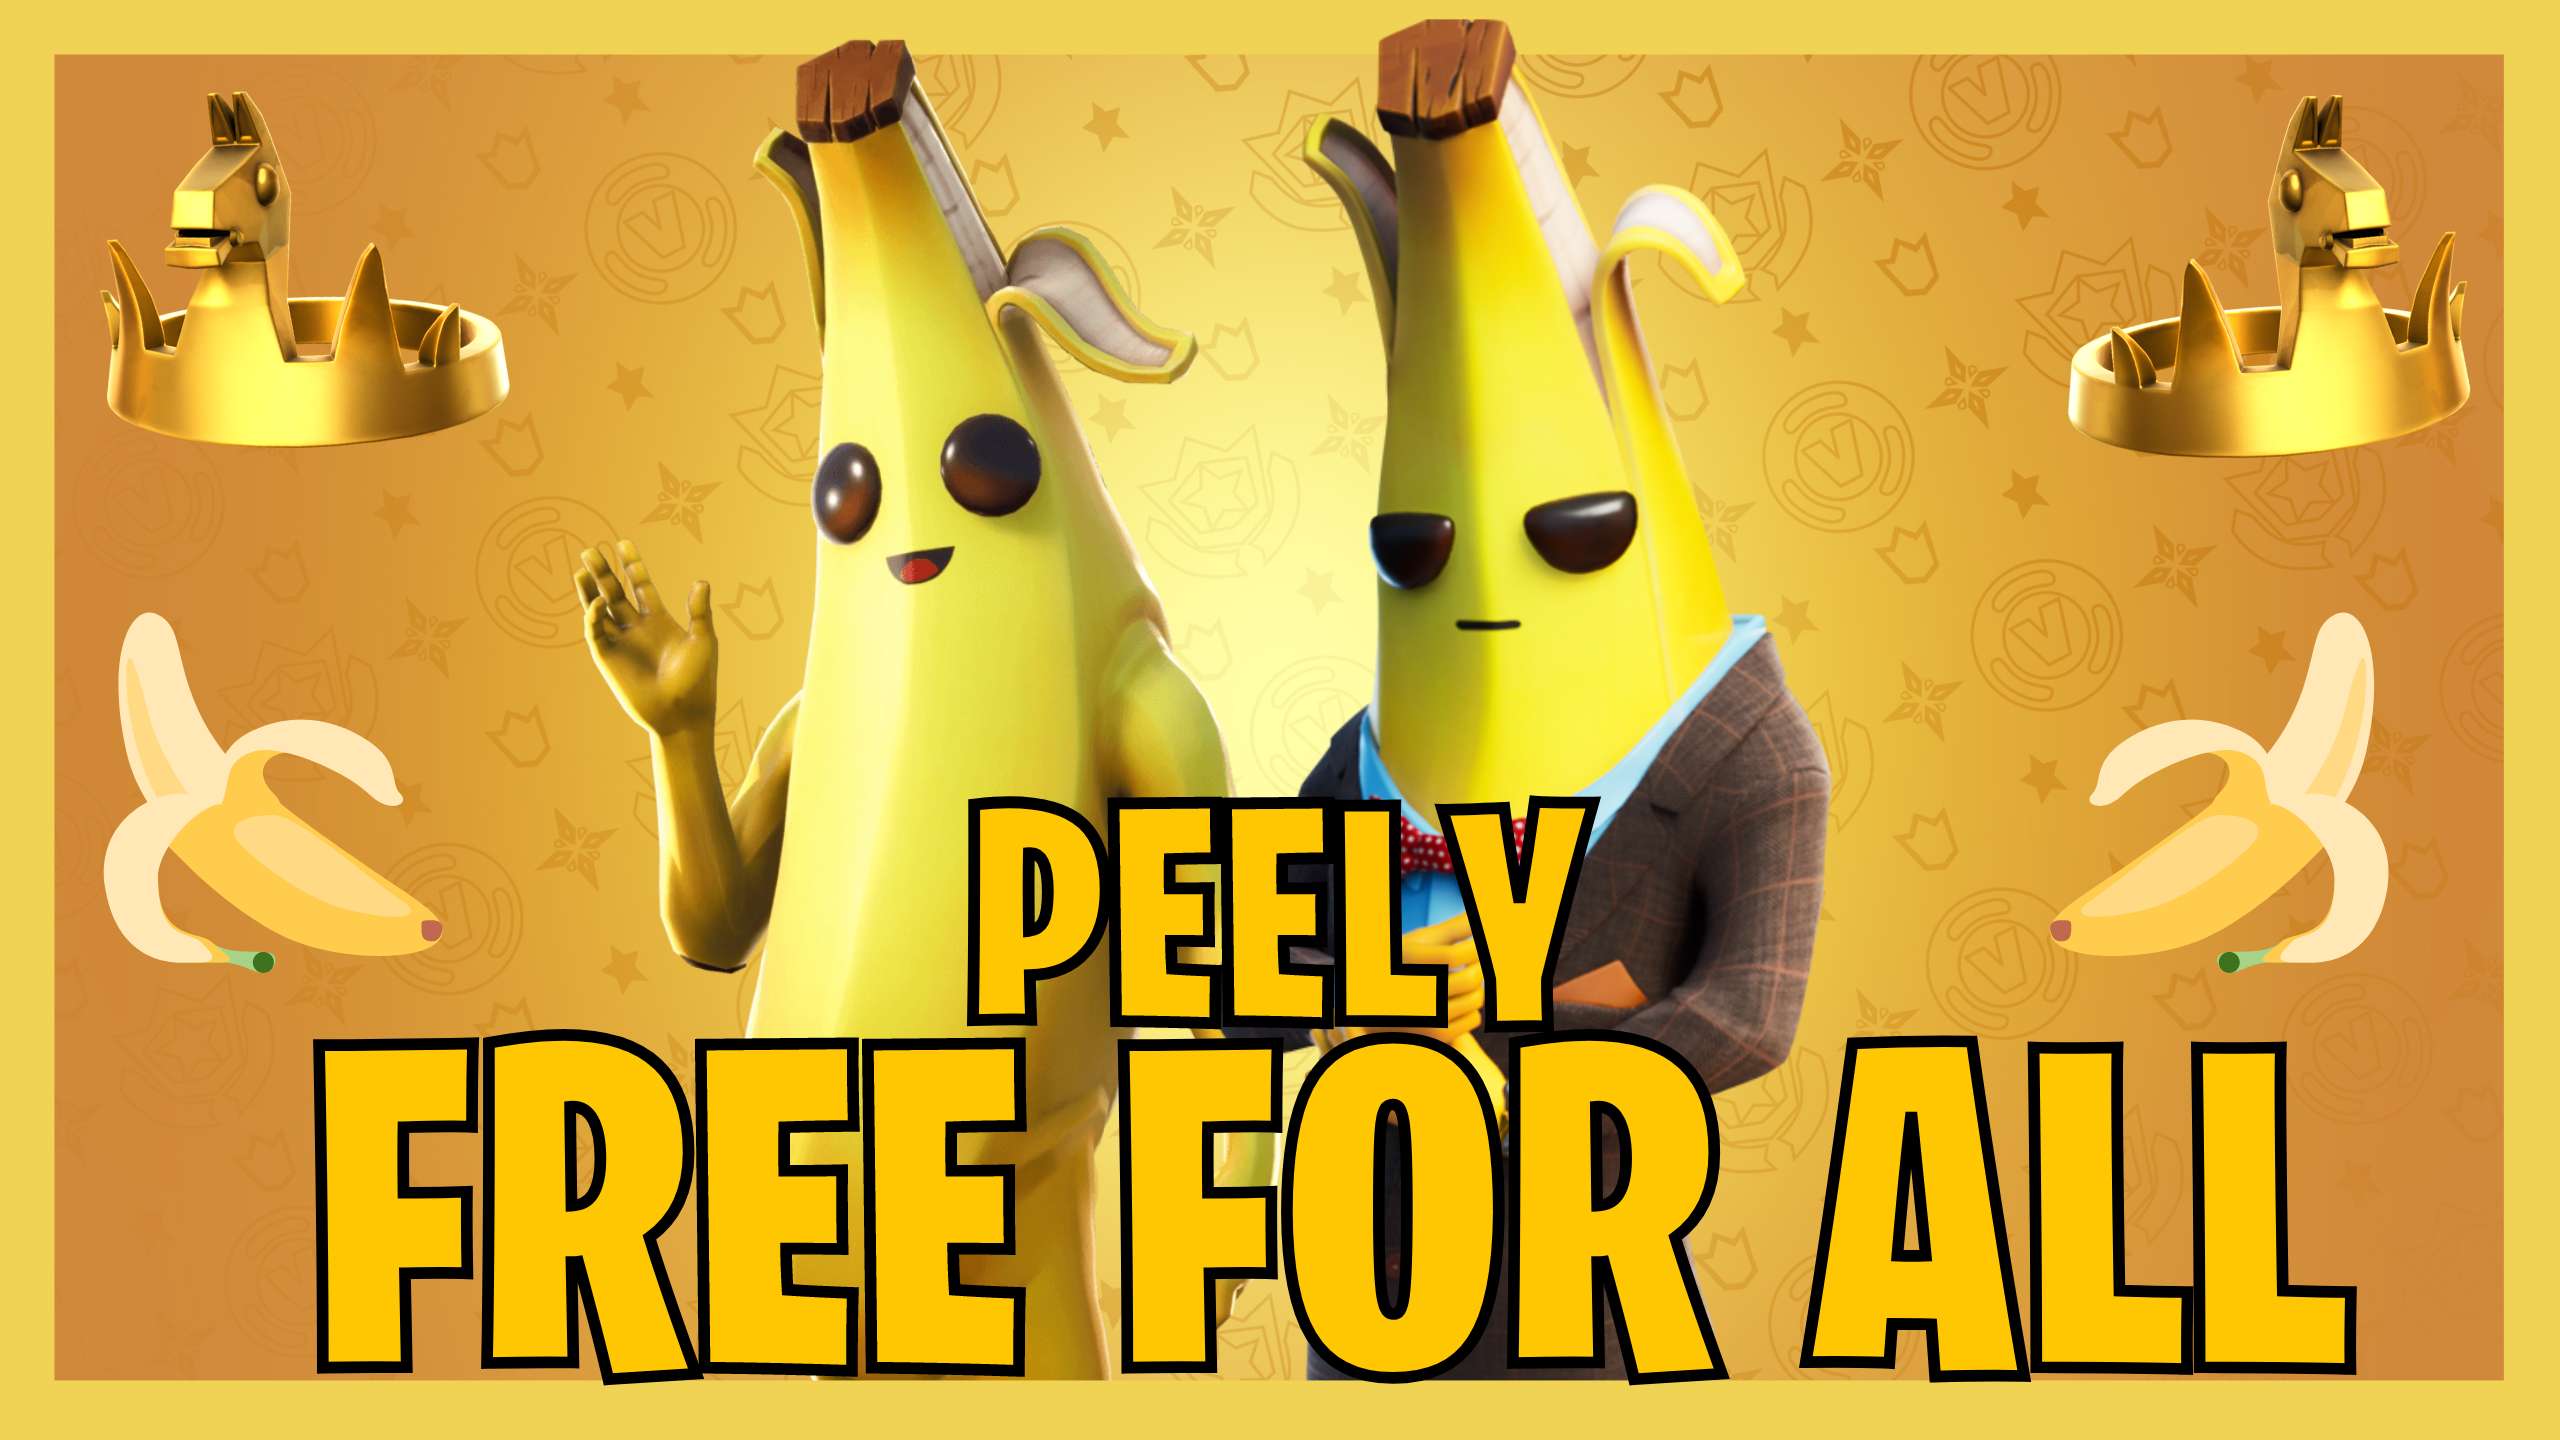 🍌 PEELY - FREE FOR ALL 🍌